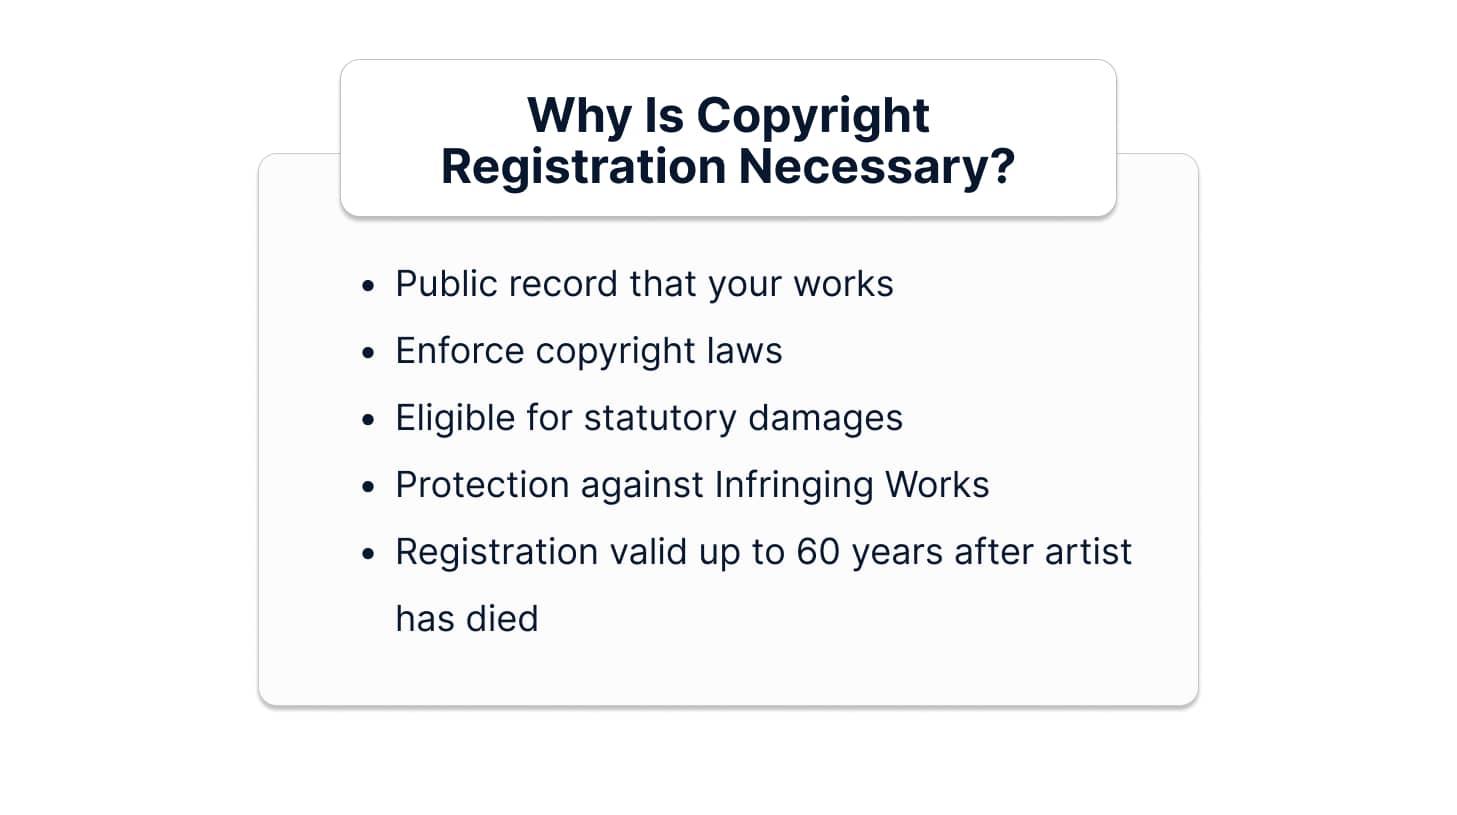 Why is Copyright Registration necessary?